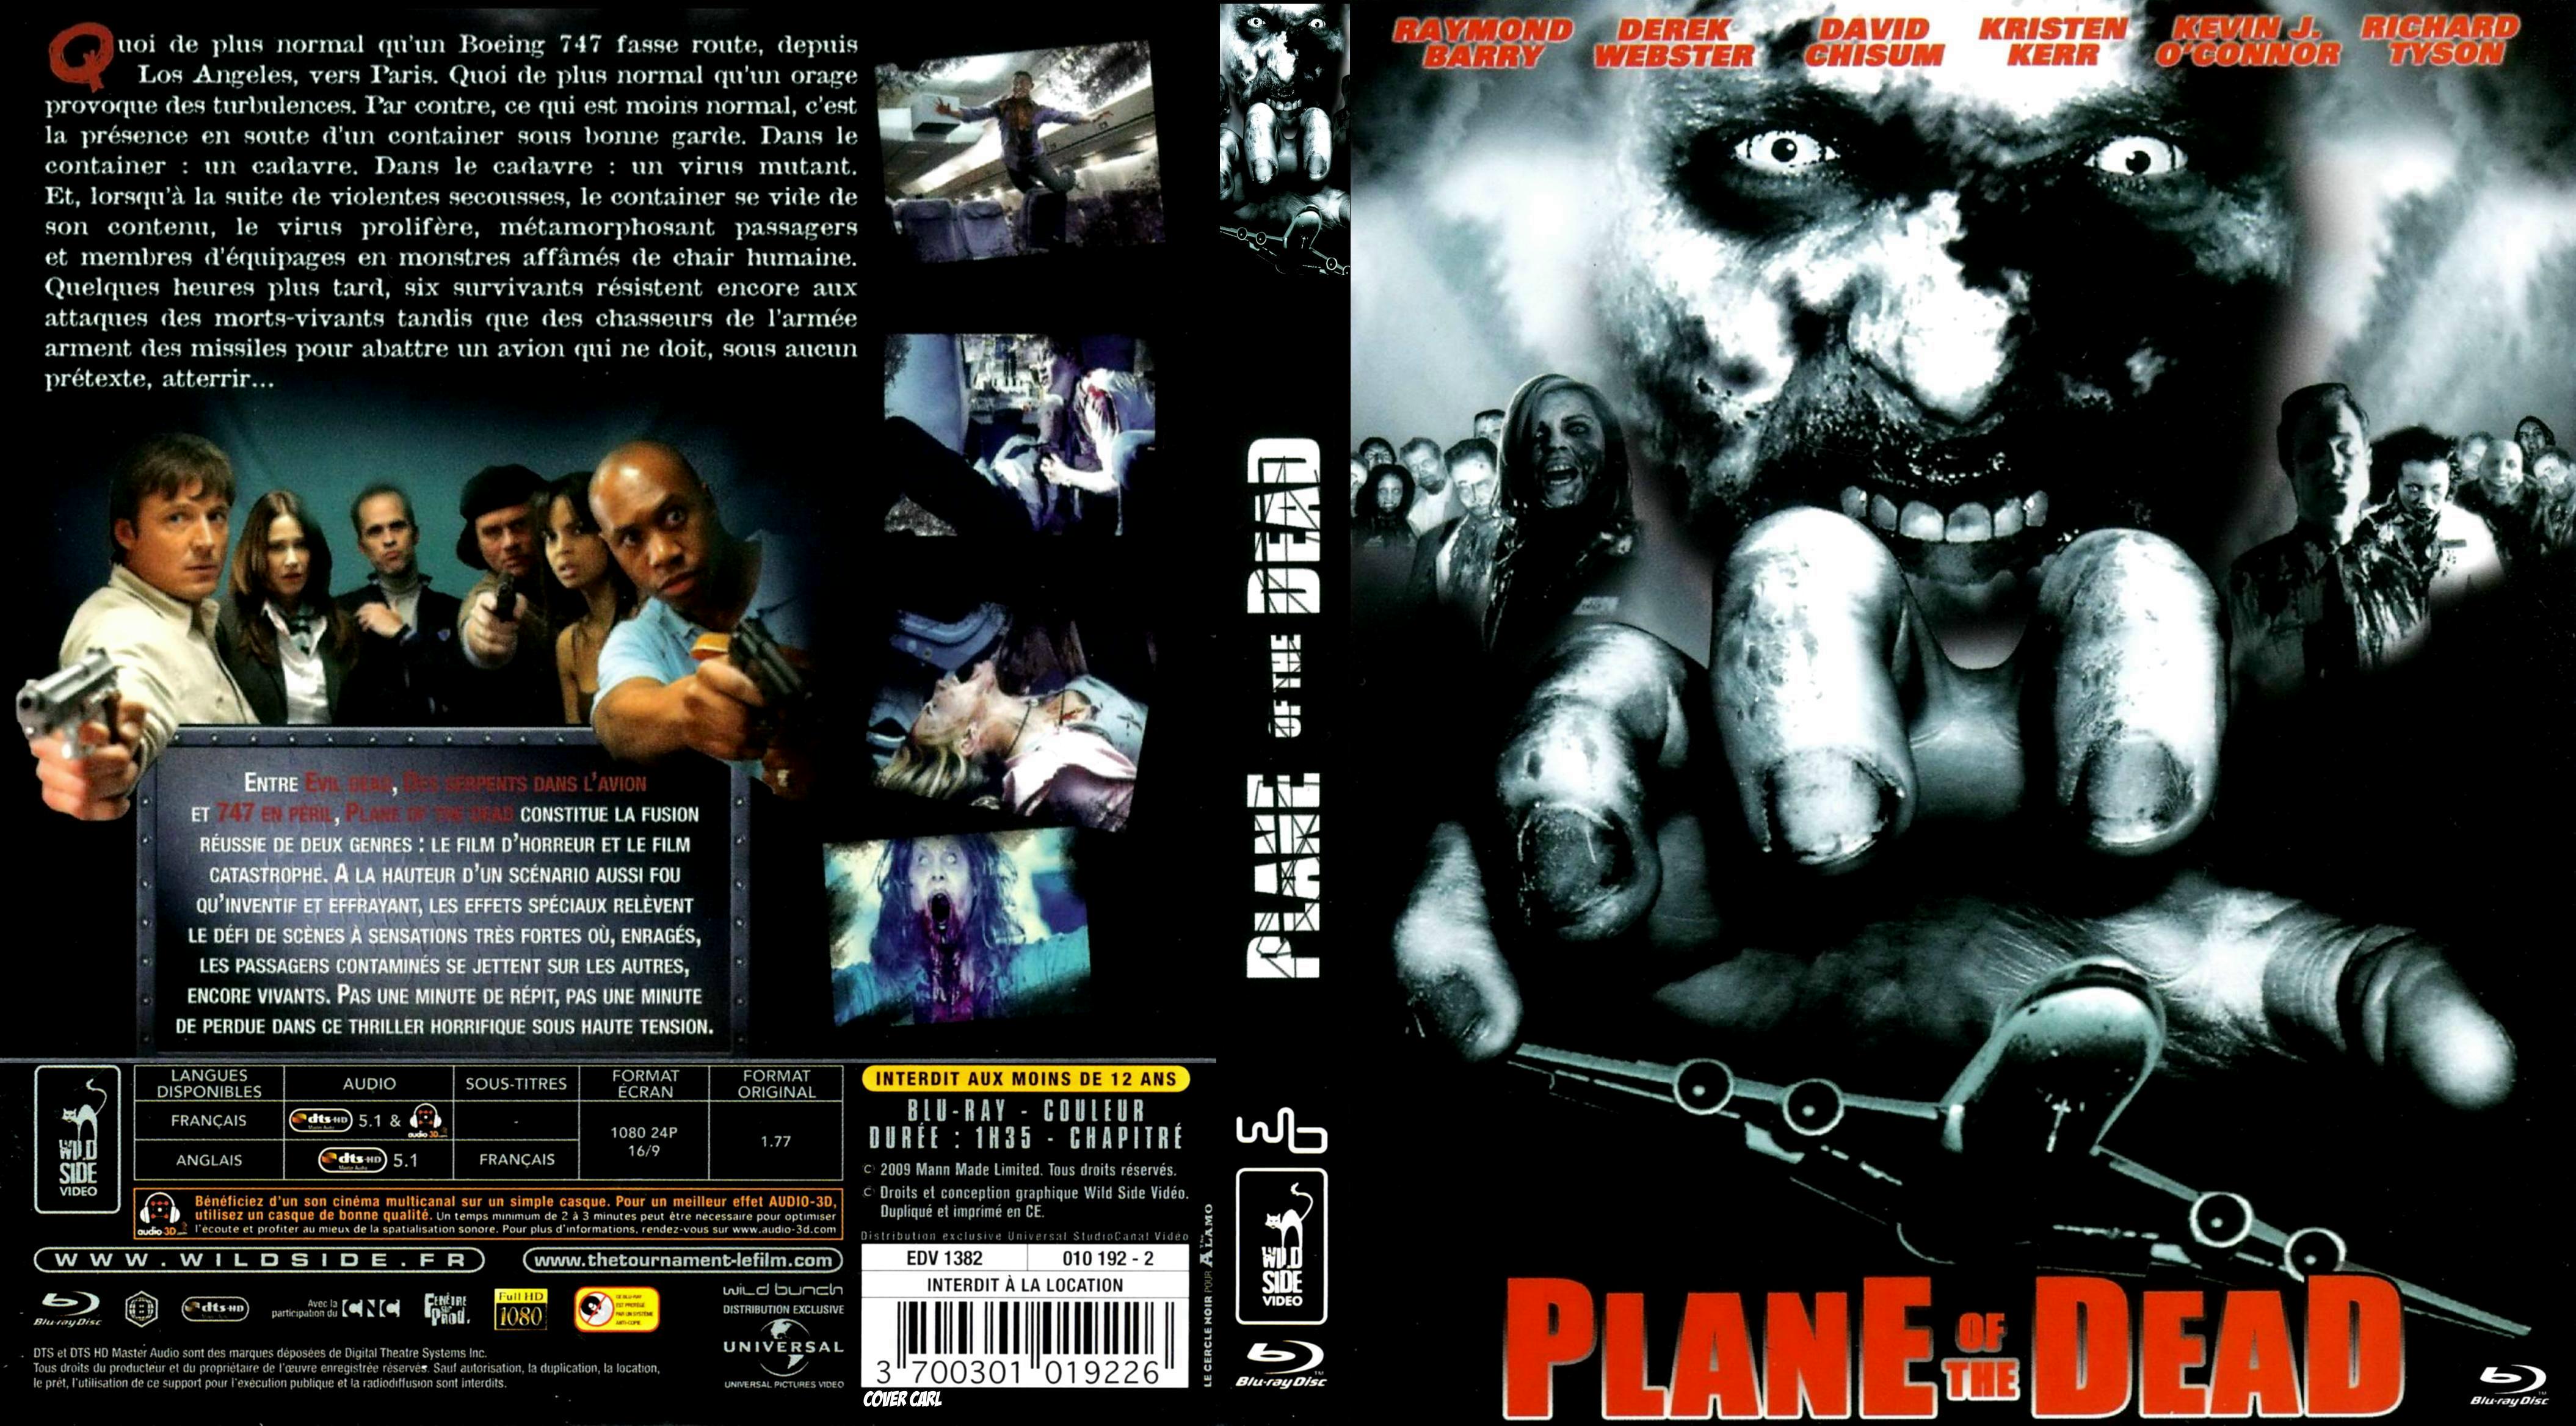 Jaquette DVD Plane of the dead custom (BLU-RAY)